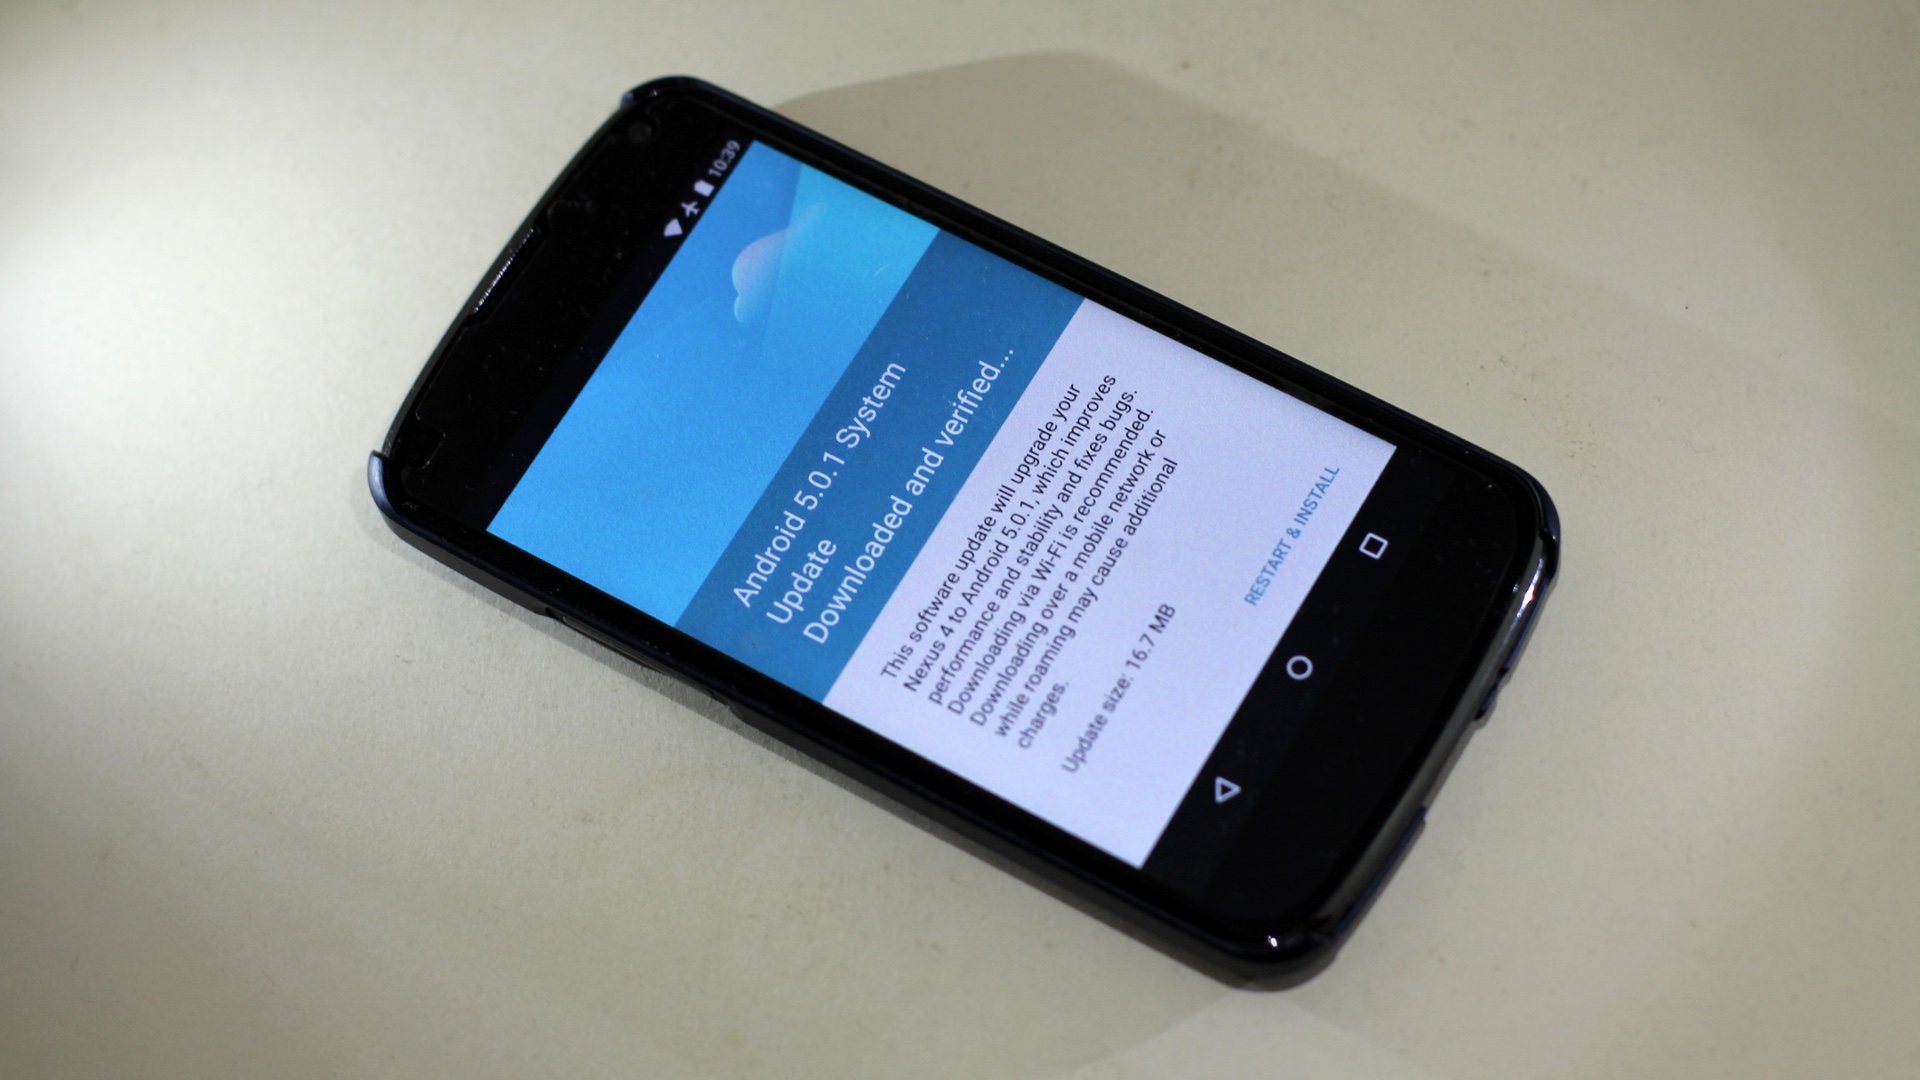 Android 5.0.1 for Nexus 4